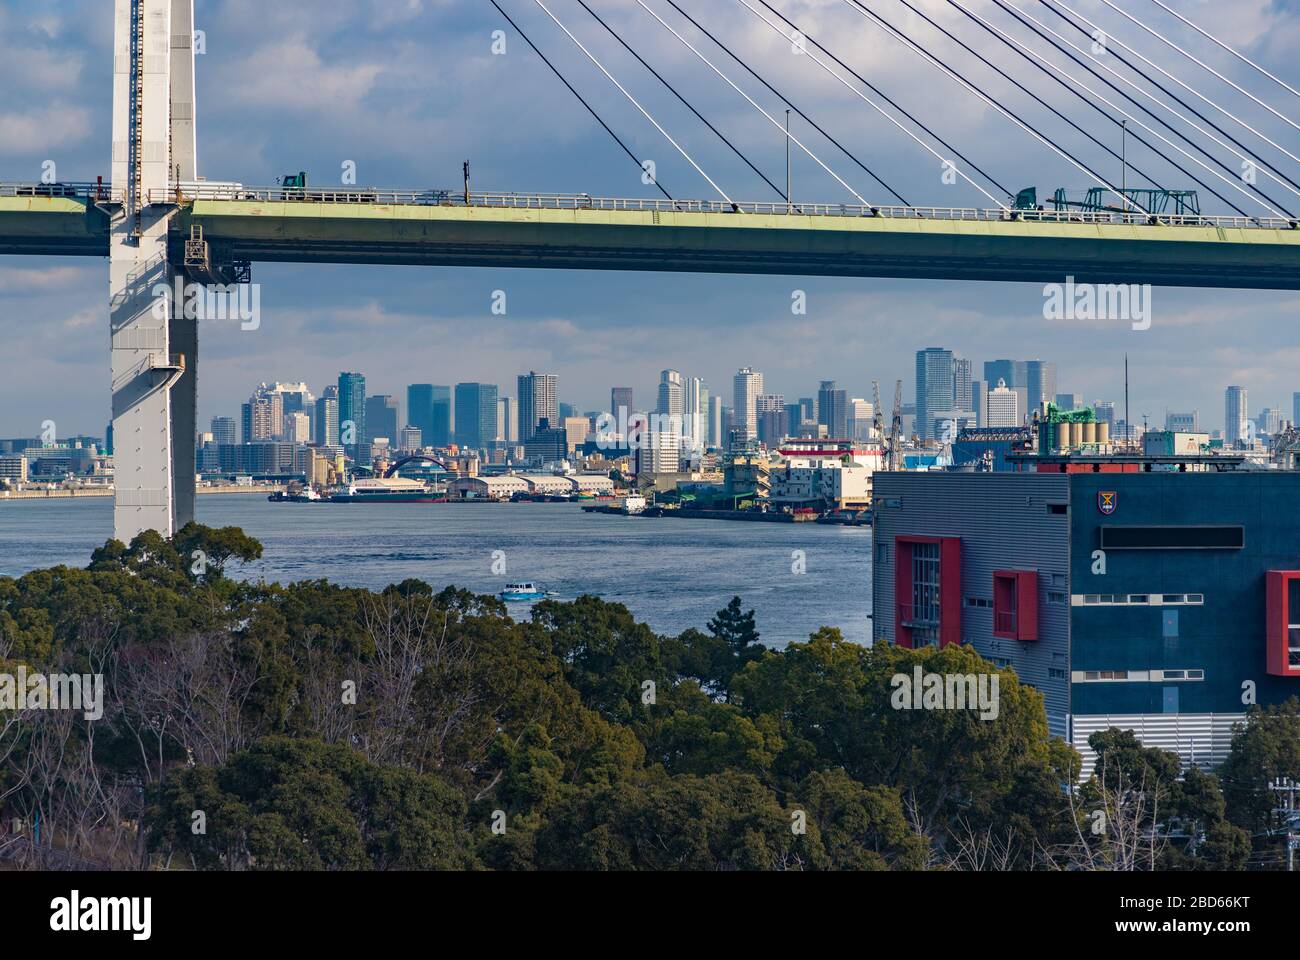 A picture of the Osaka skyline as seen from the Tempozan Bridge. Stock Photo